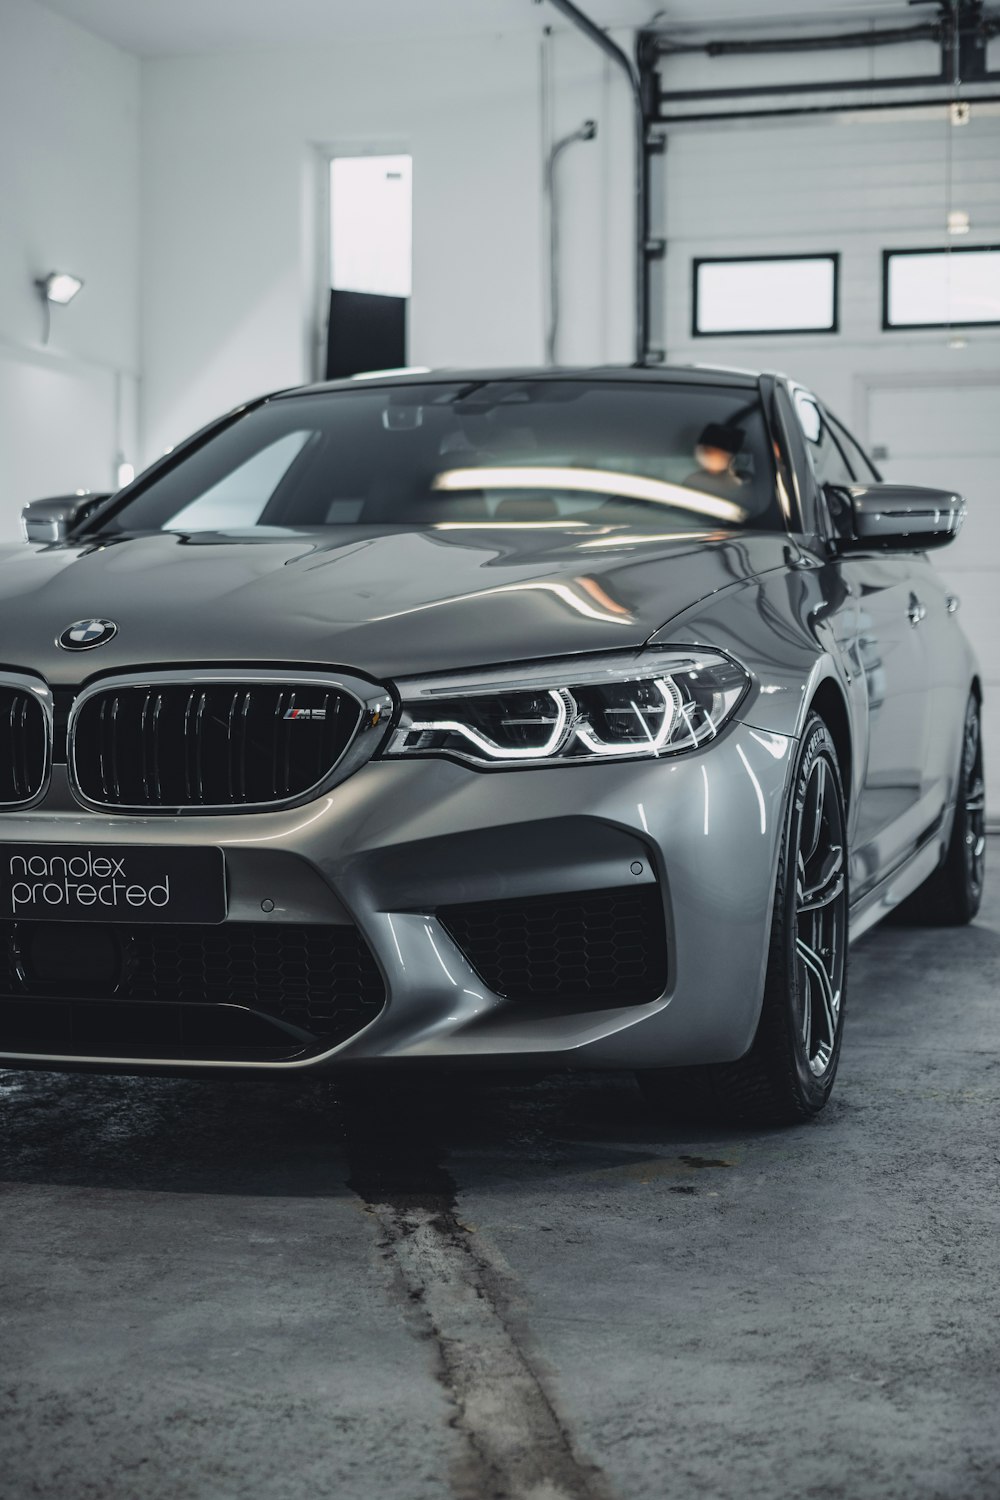 Bmw M5 Pictures Download Free Images On Unsplash